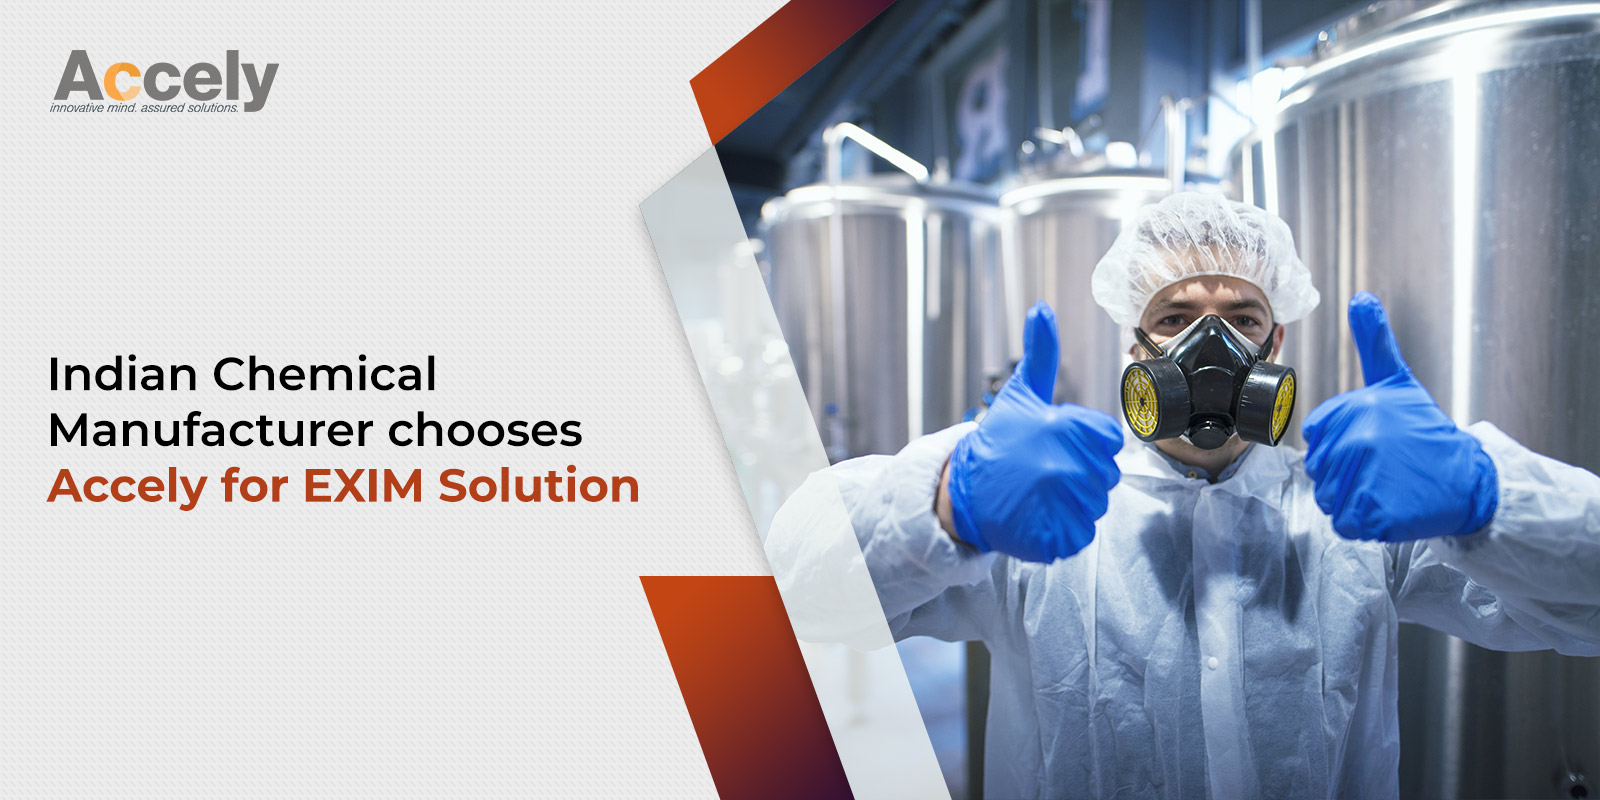 Renowned Indian Chemical Manufacturer selects Accely for EXIM Go-Live